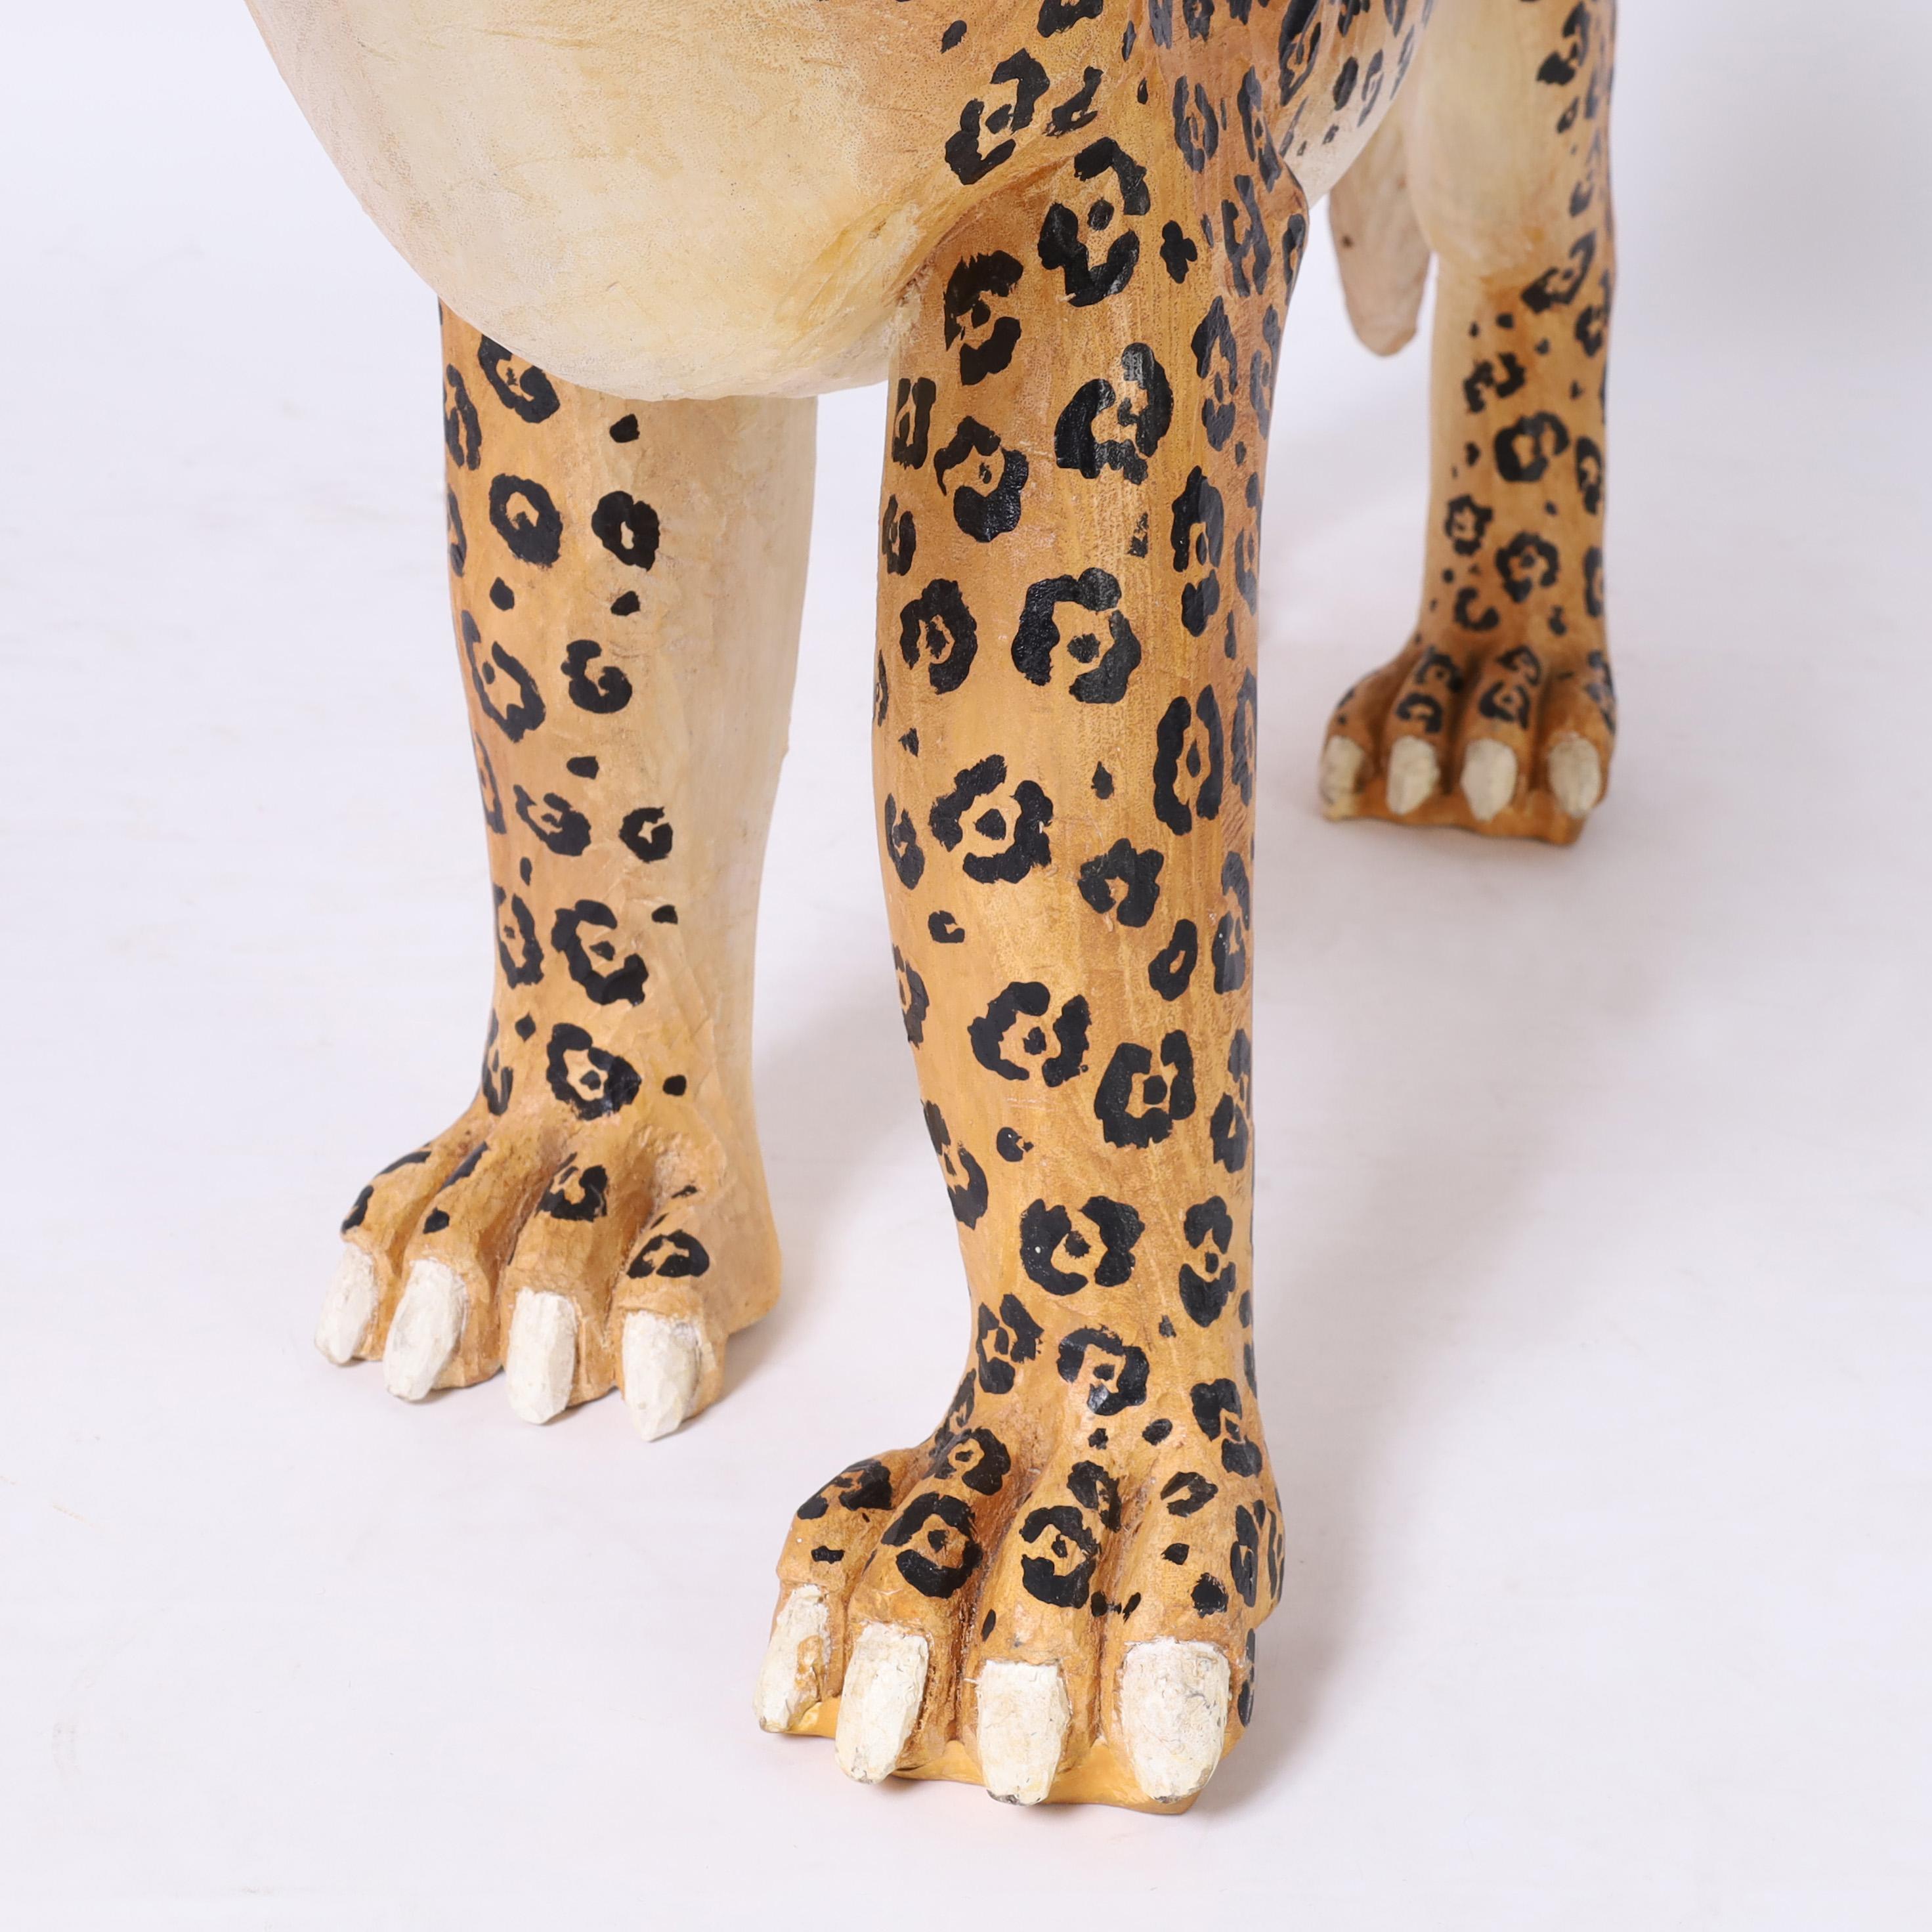 Carved and Painted Wood Jaguar or Big Cat For Sale 5